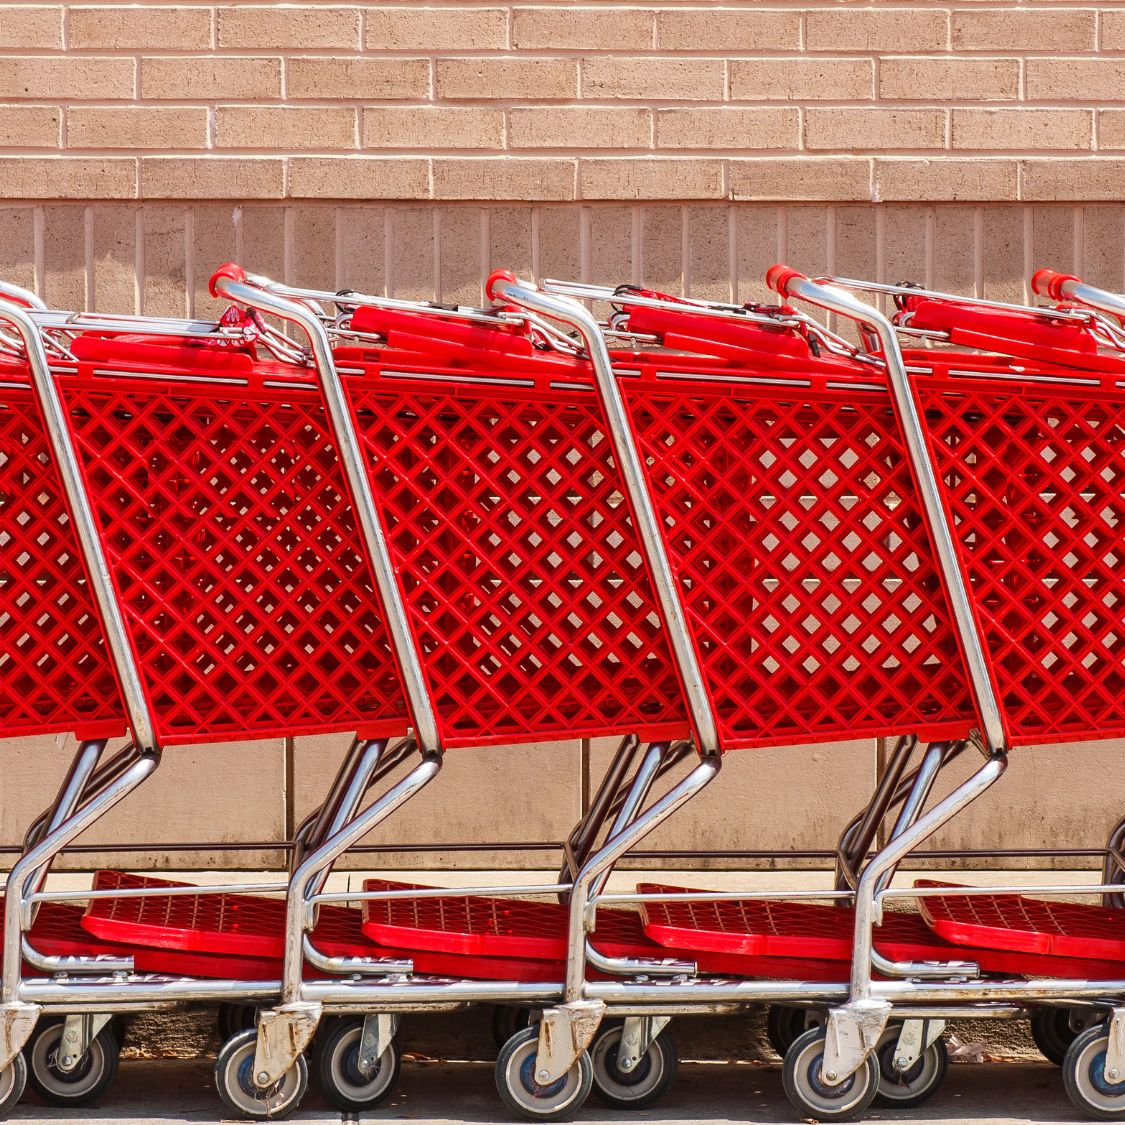 Why Plastic Shopping Carts Are Great for Your Grocery Store